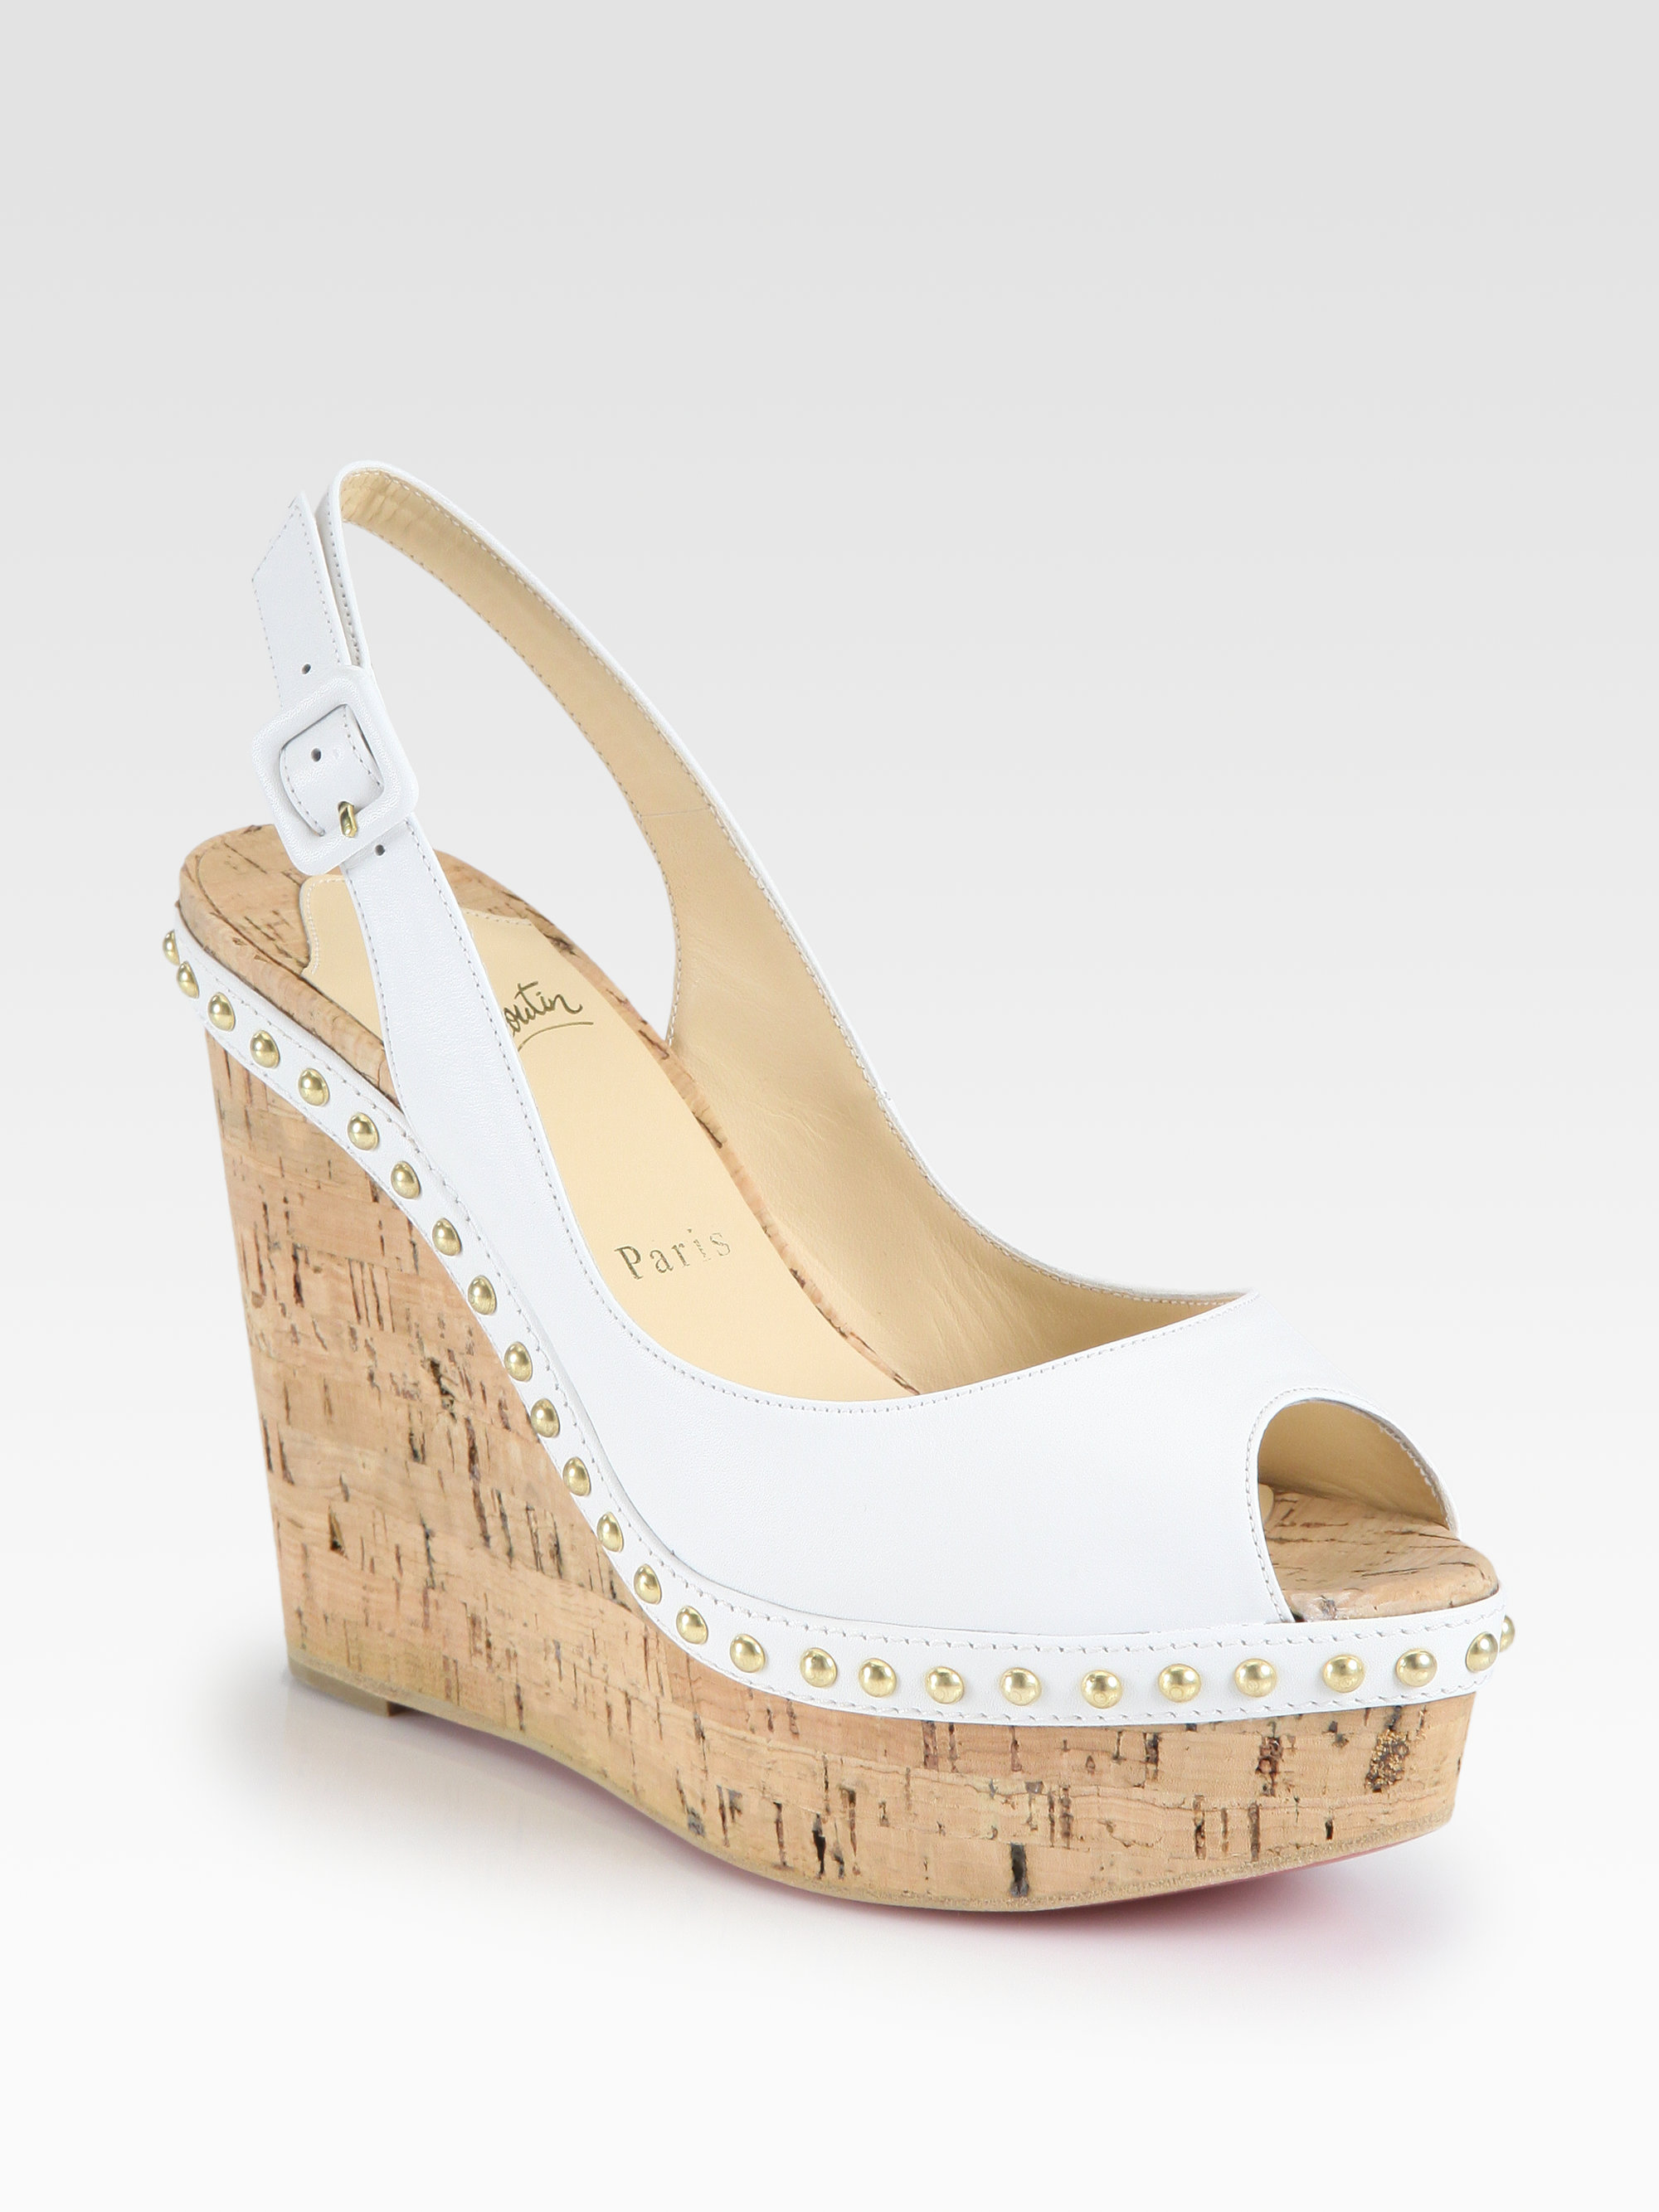 Christian louboutin Monico Studded Leather Cork Wedge Pumps in ...